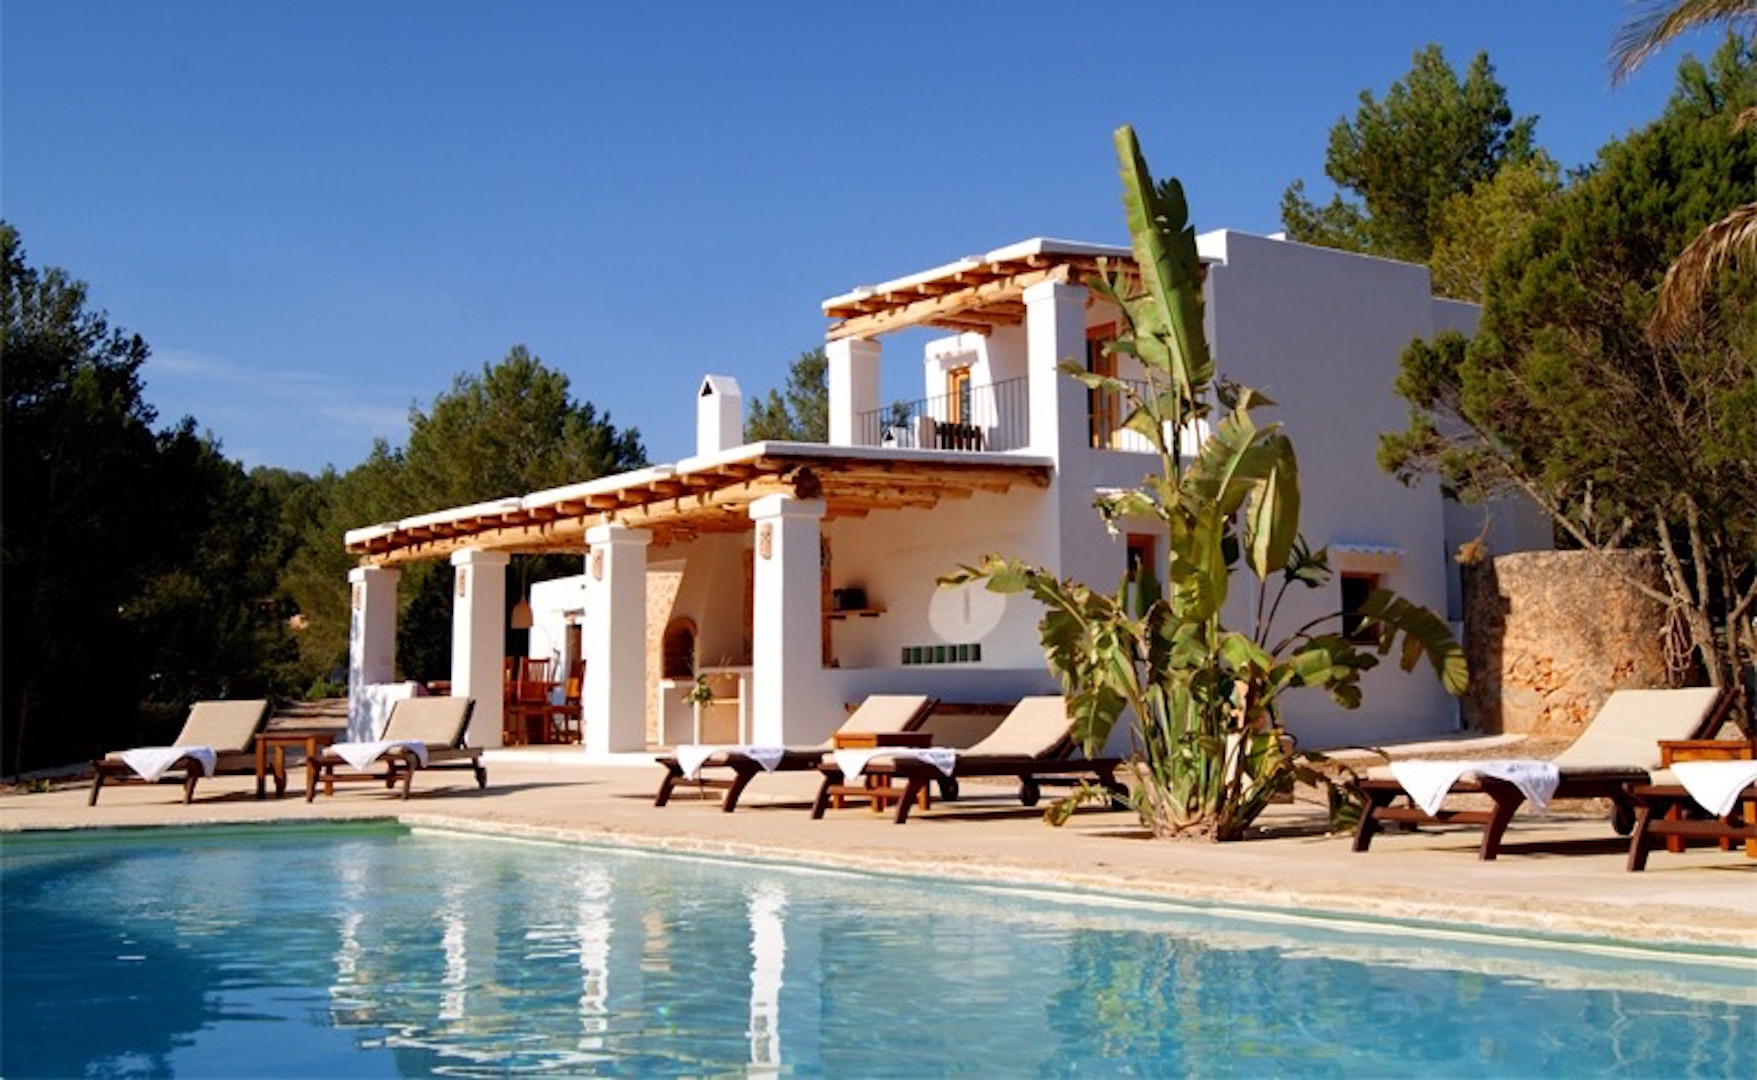 Lovely 3 bed house with pool to rent in Ibiza